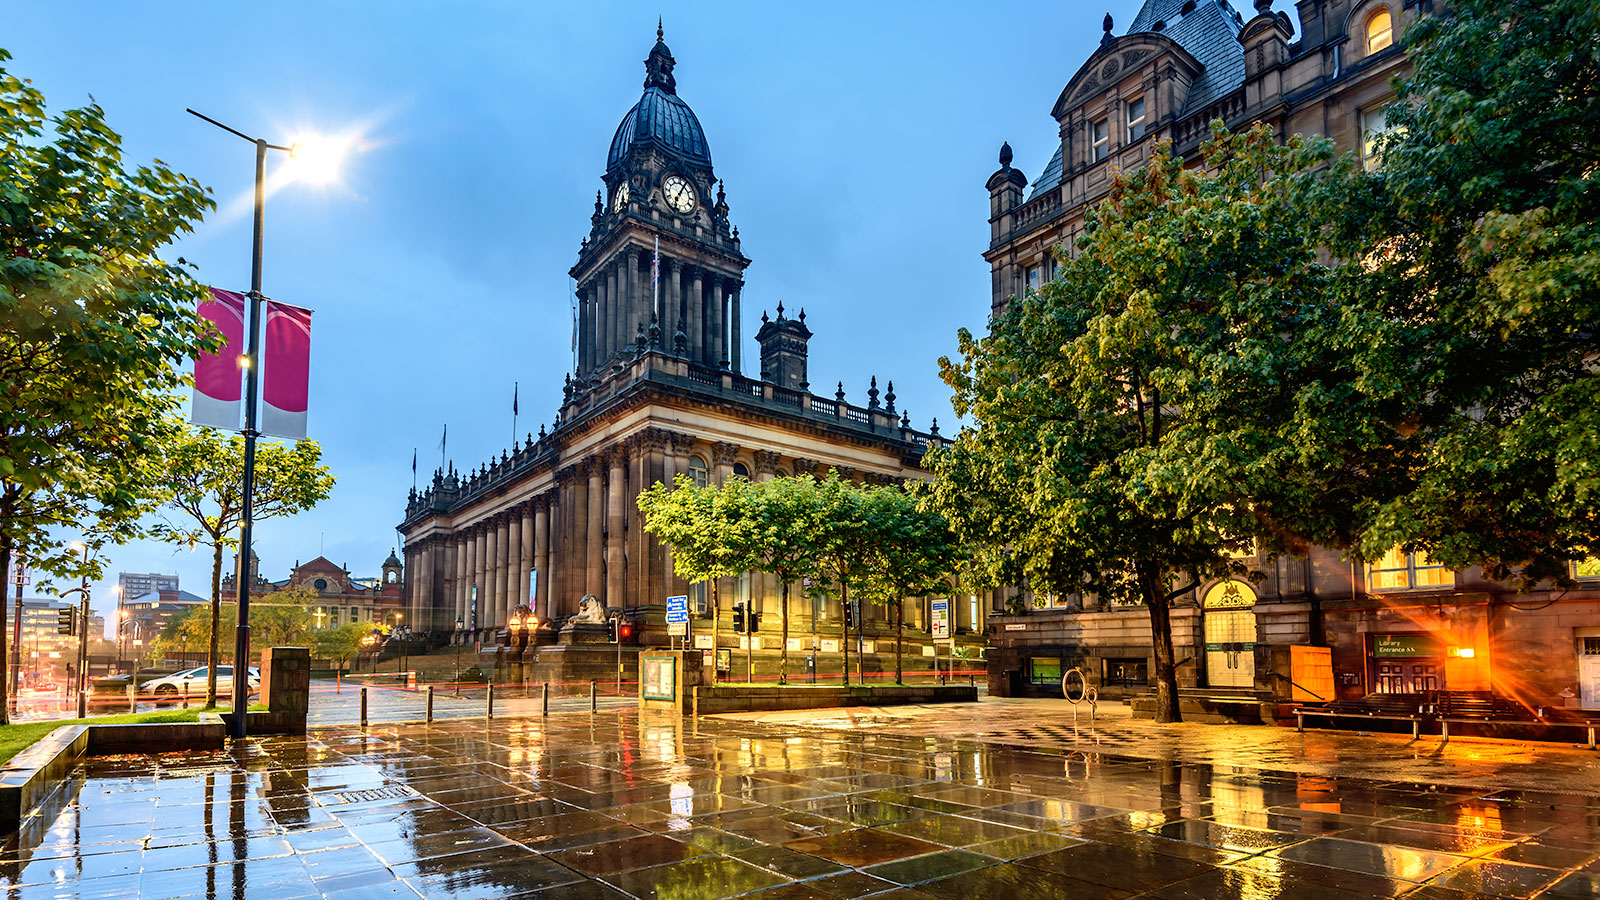 Leeds City Council has rolled out a new initiative aimed at providing residents with access to heavily discounted green energy solutions.